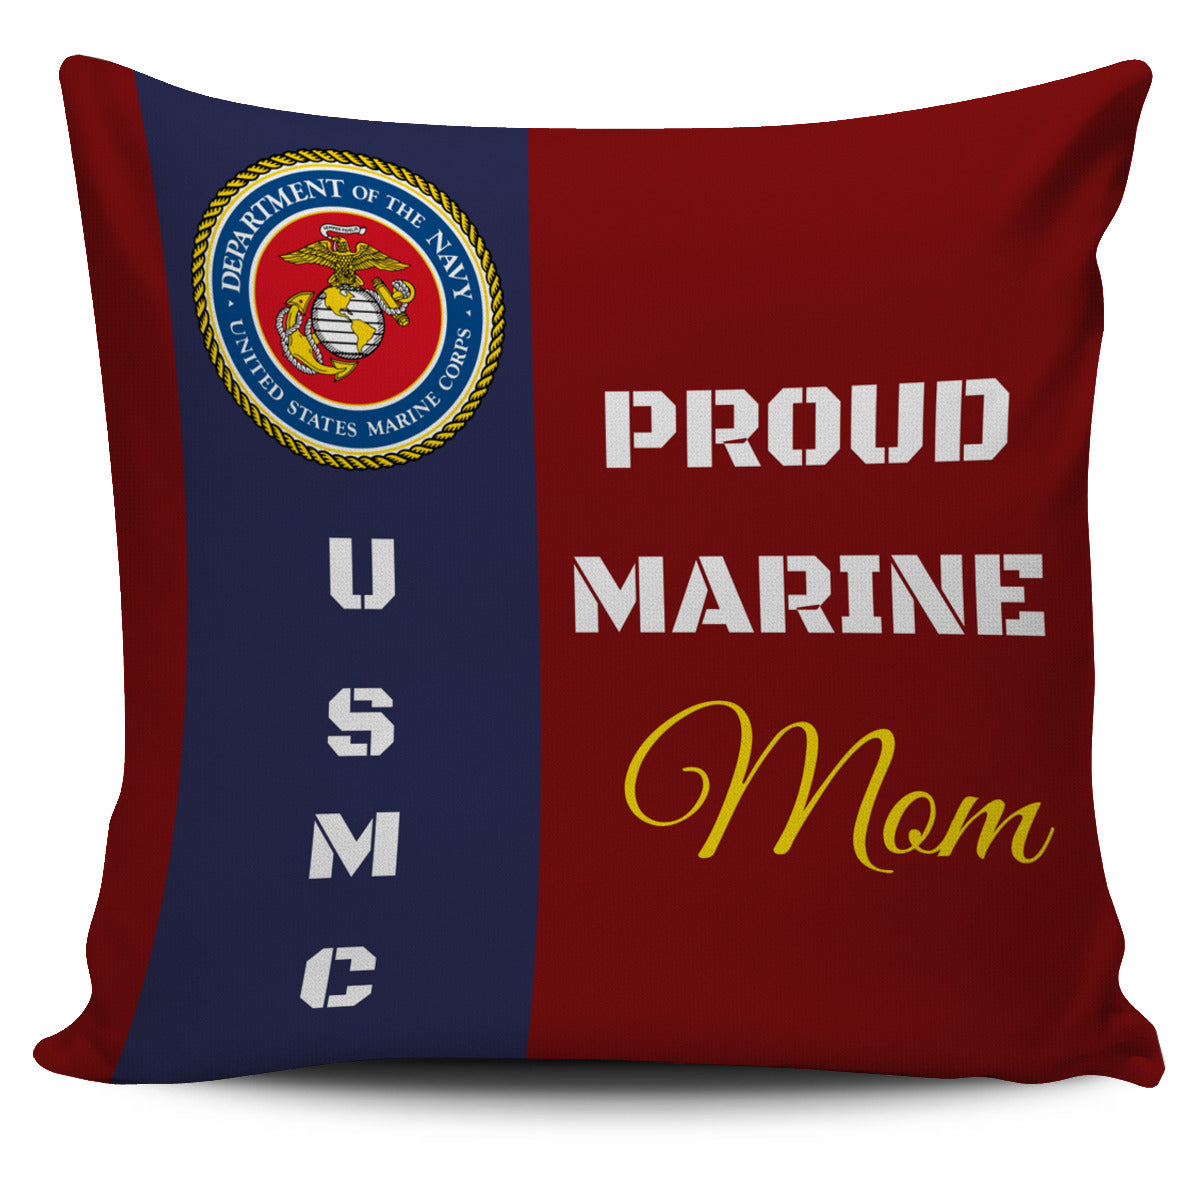 FREE Proud Marine Family Pillow Cases